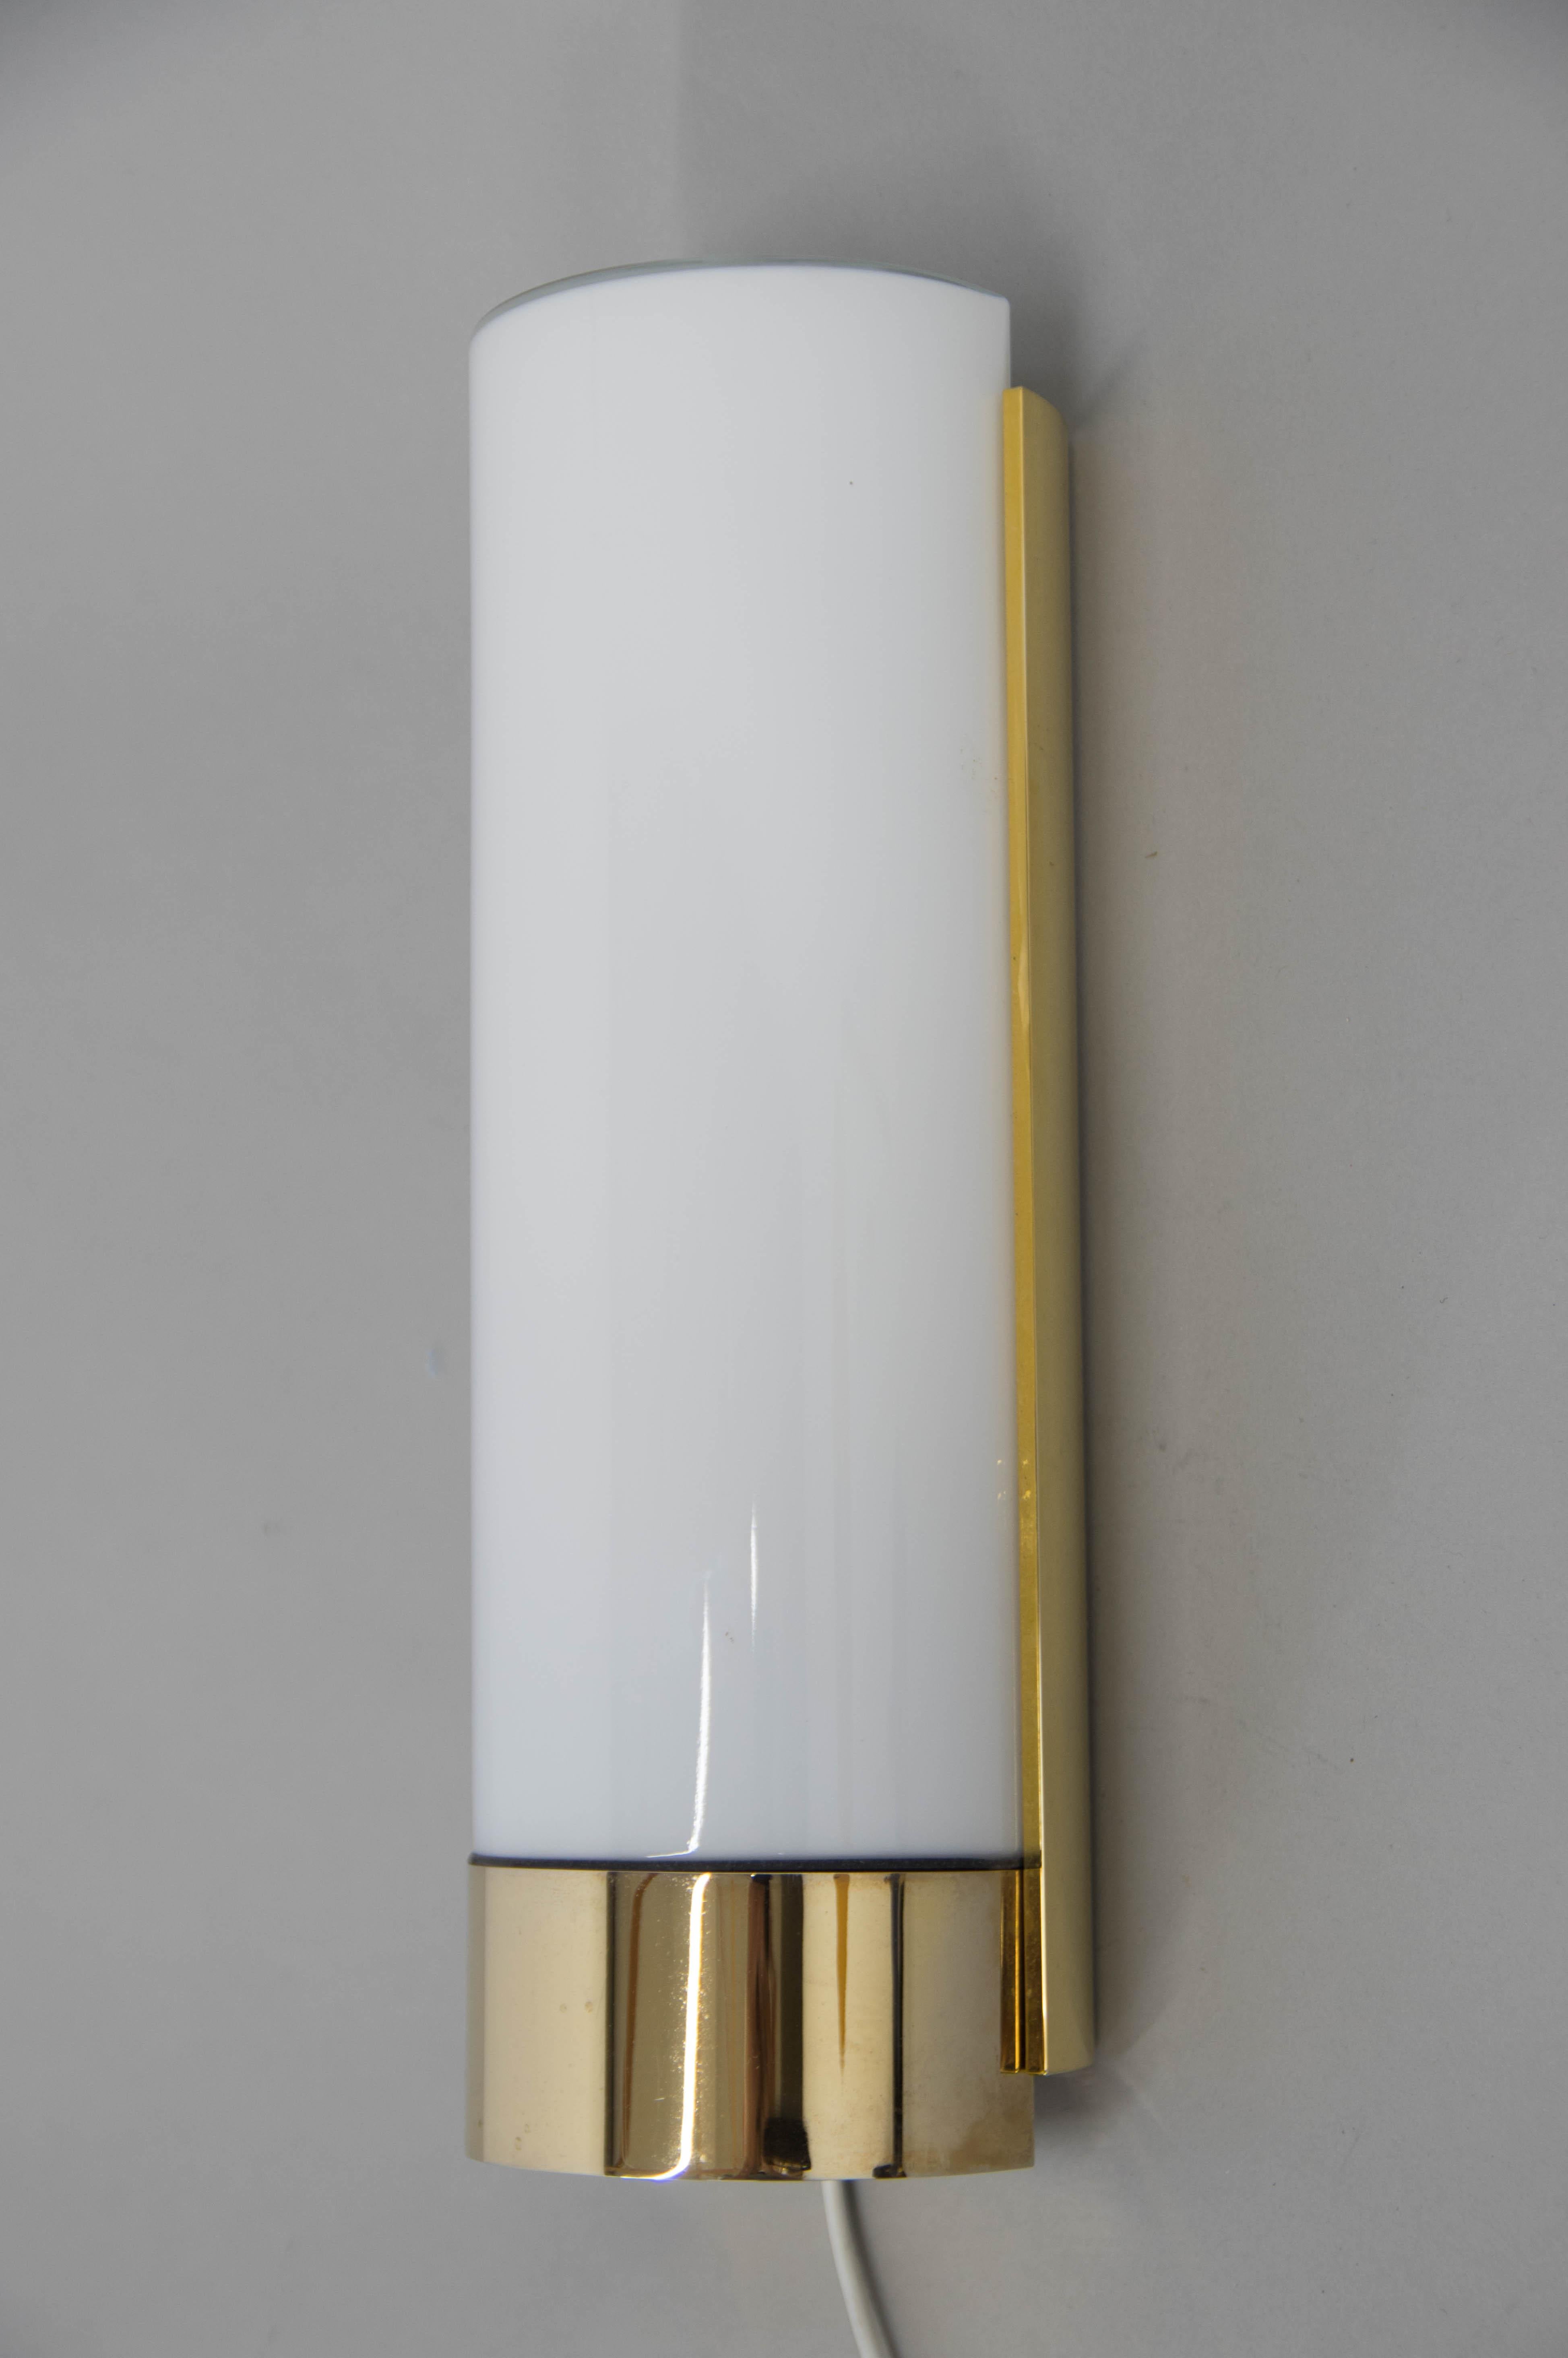 Brass base with minimum age patina, polished.
Opaline glass in perfect condition.
Very good original condition.
1x100W, E25-E27 Bulb.
US wiring compatible.